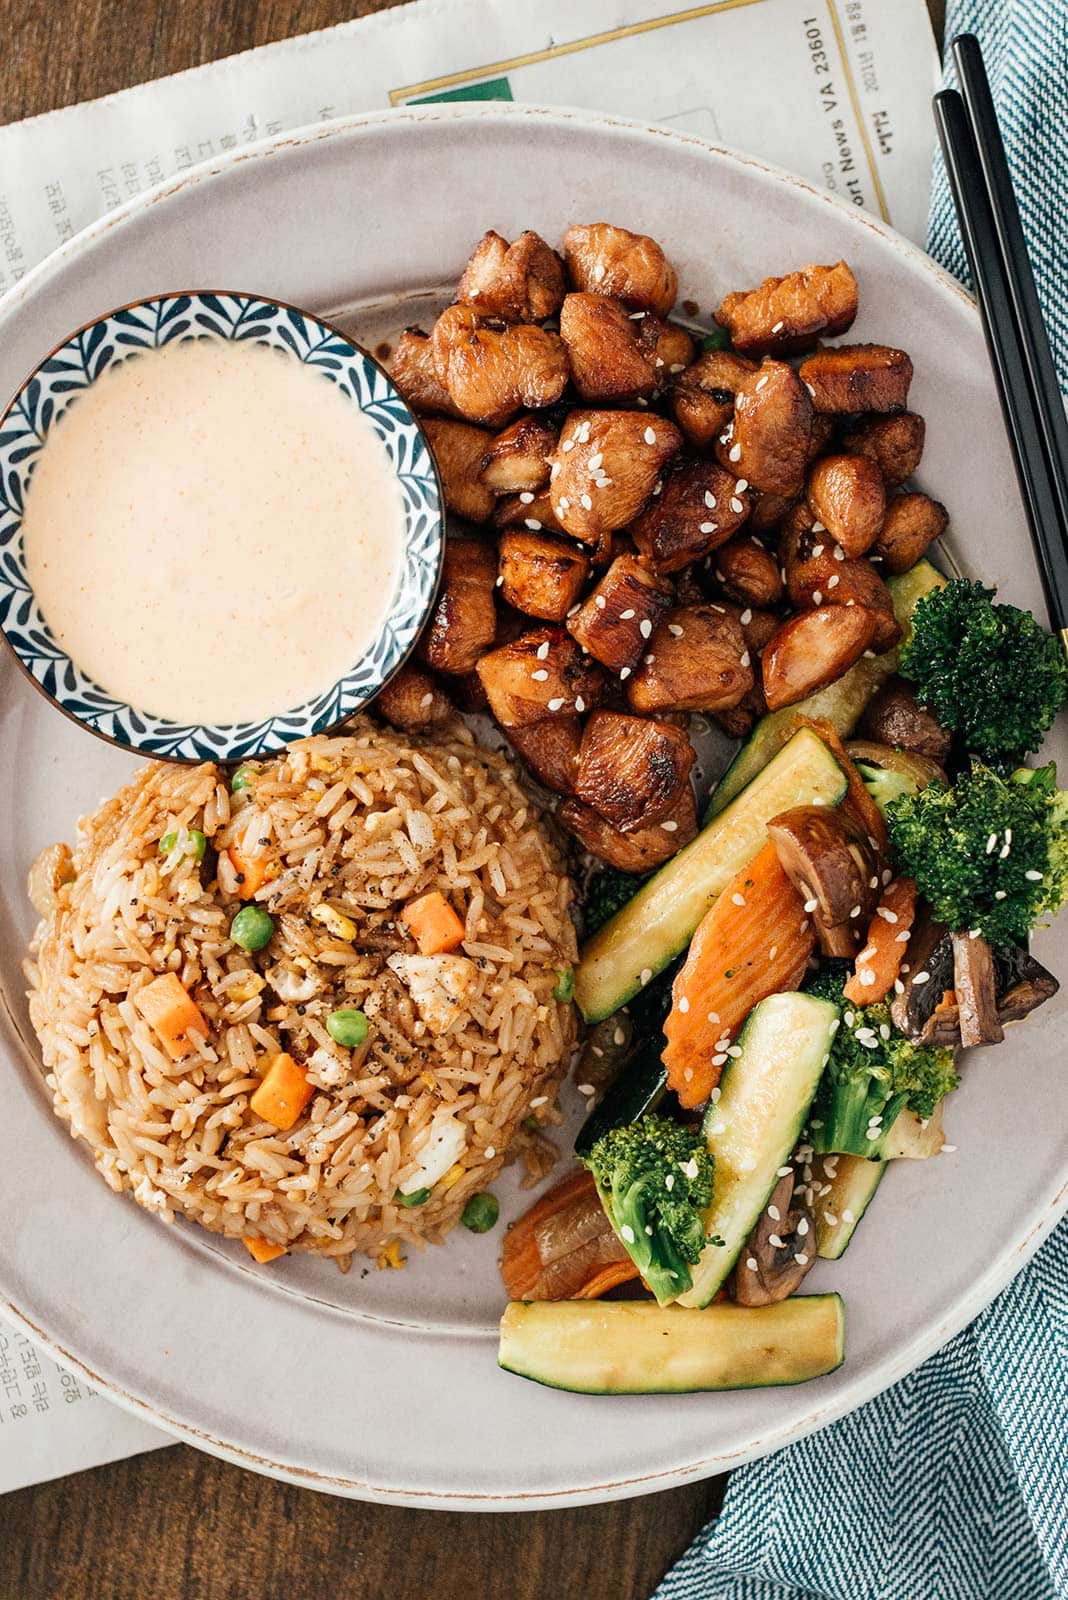 Hibachi rice, chicken and veggies on a white plate with some yum yum sauce on the side.